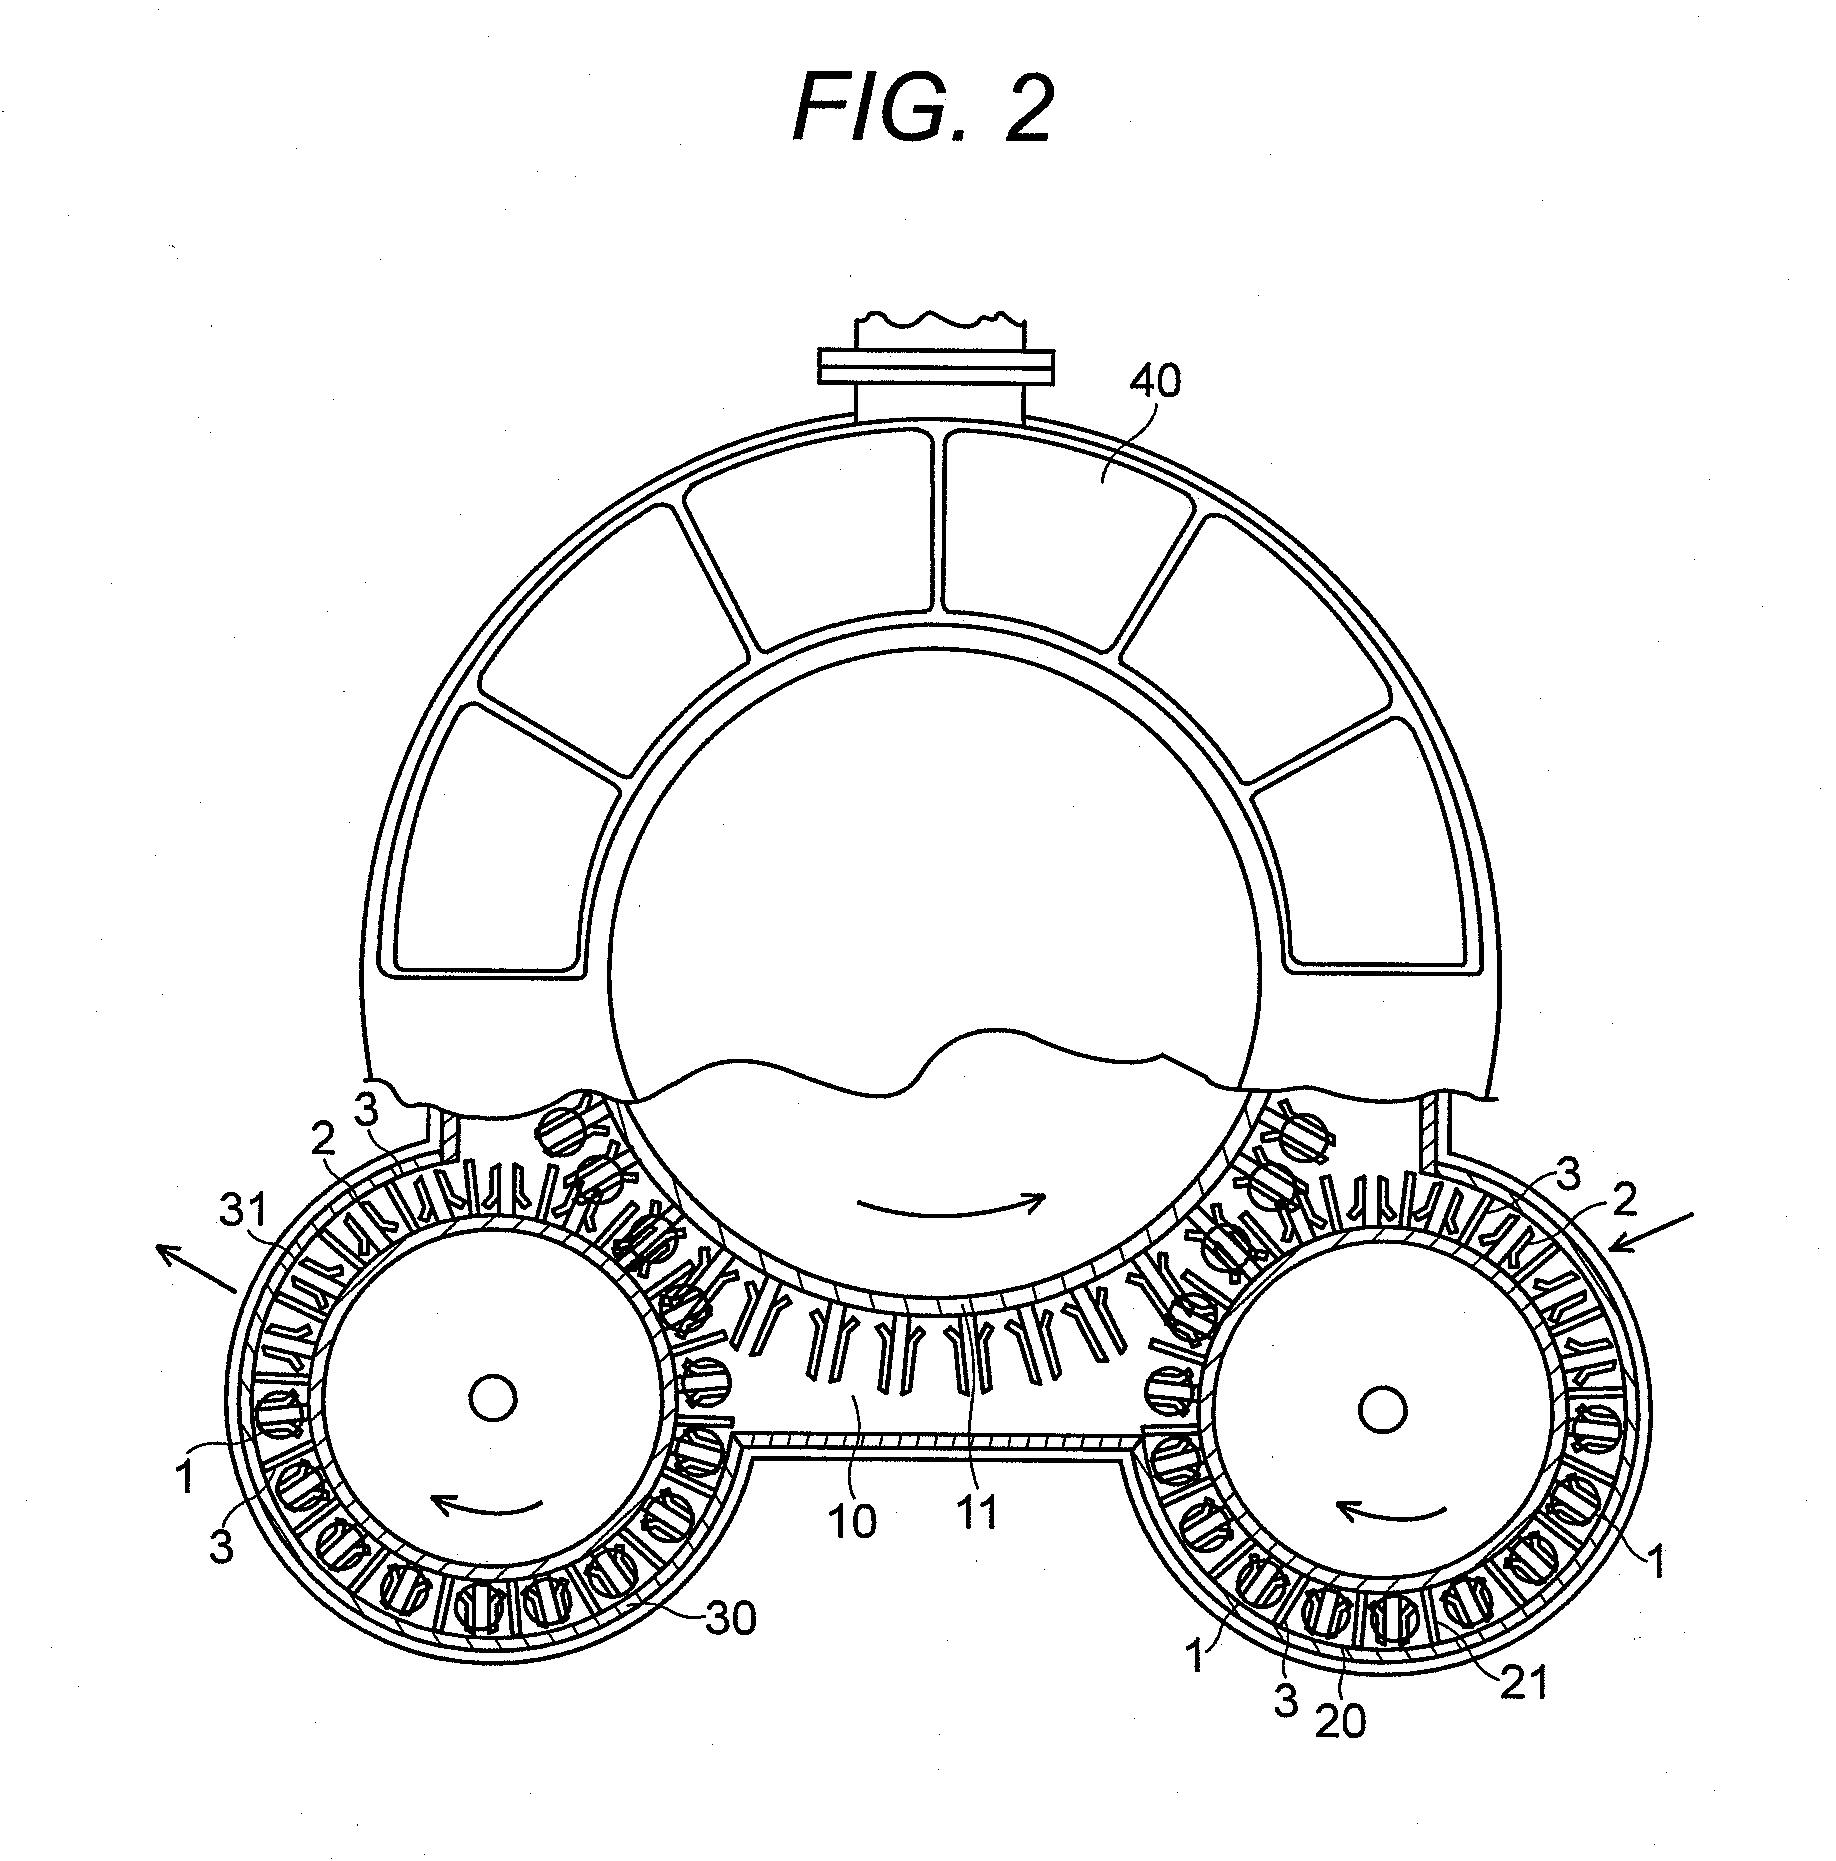 Electron beam irradiation apparatus for open-mouthed containers